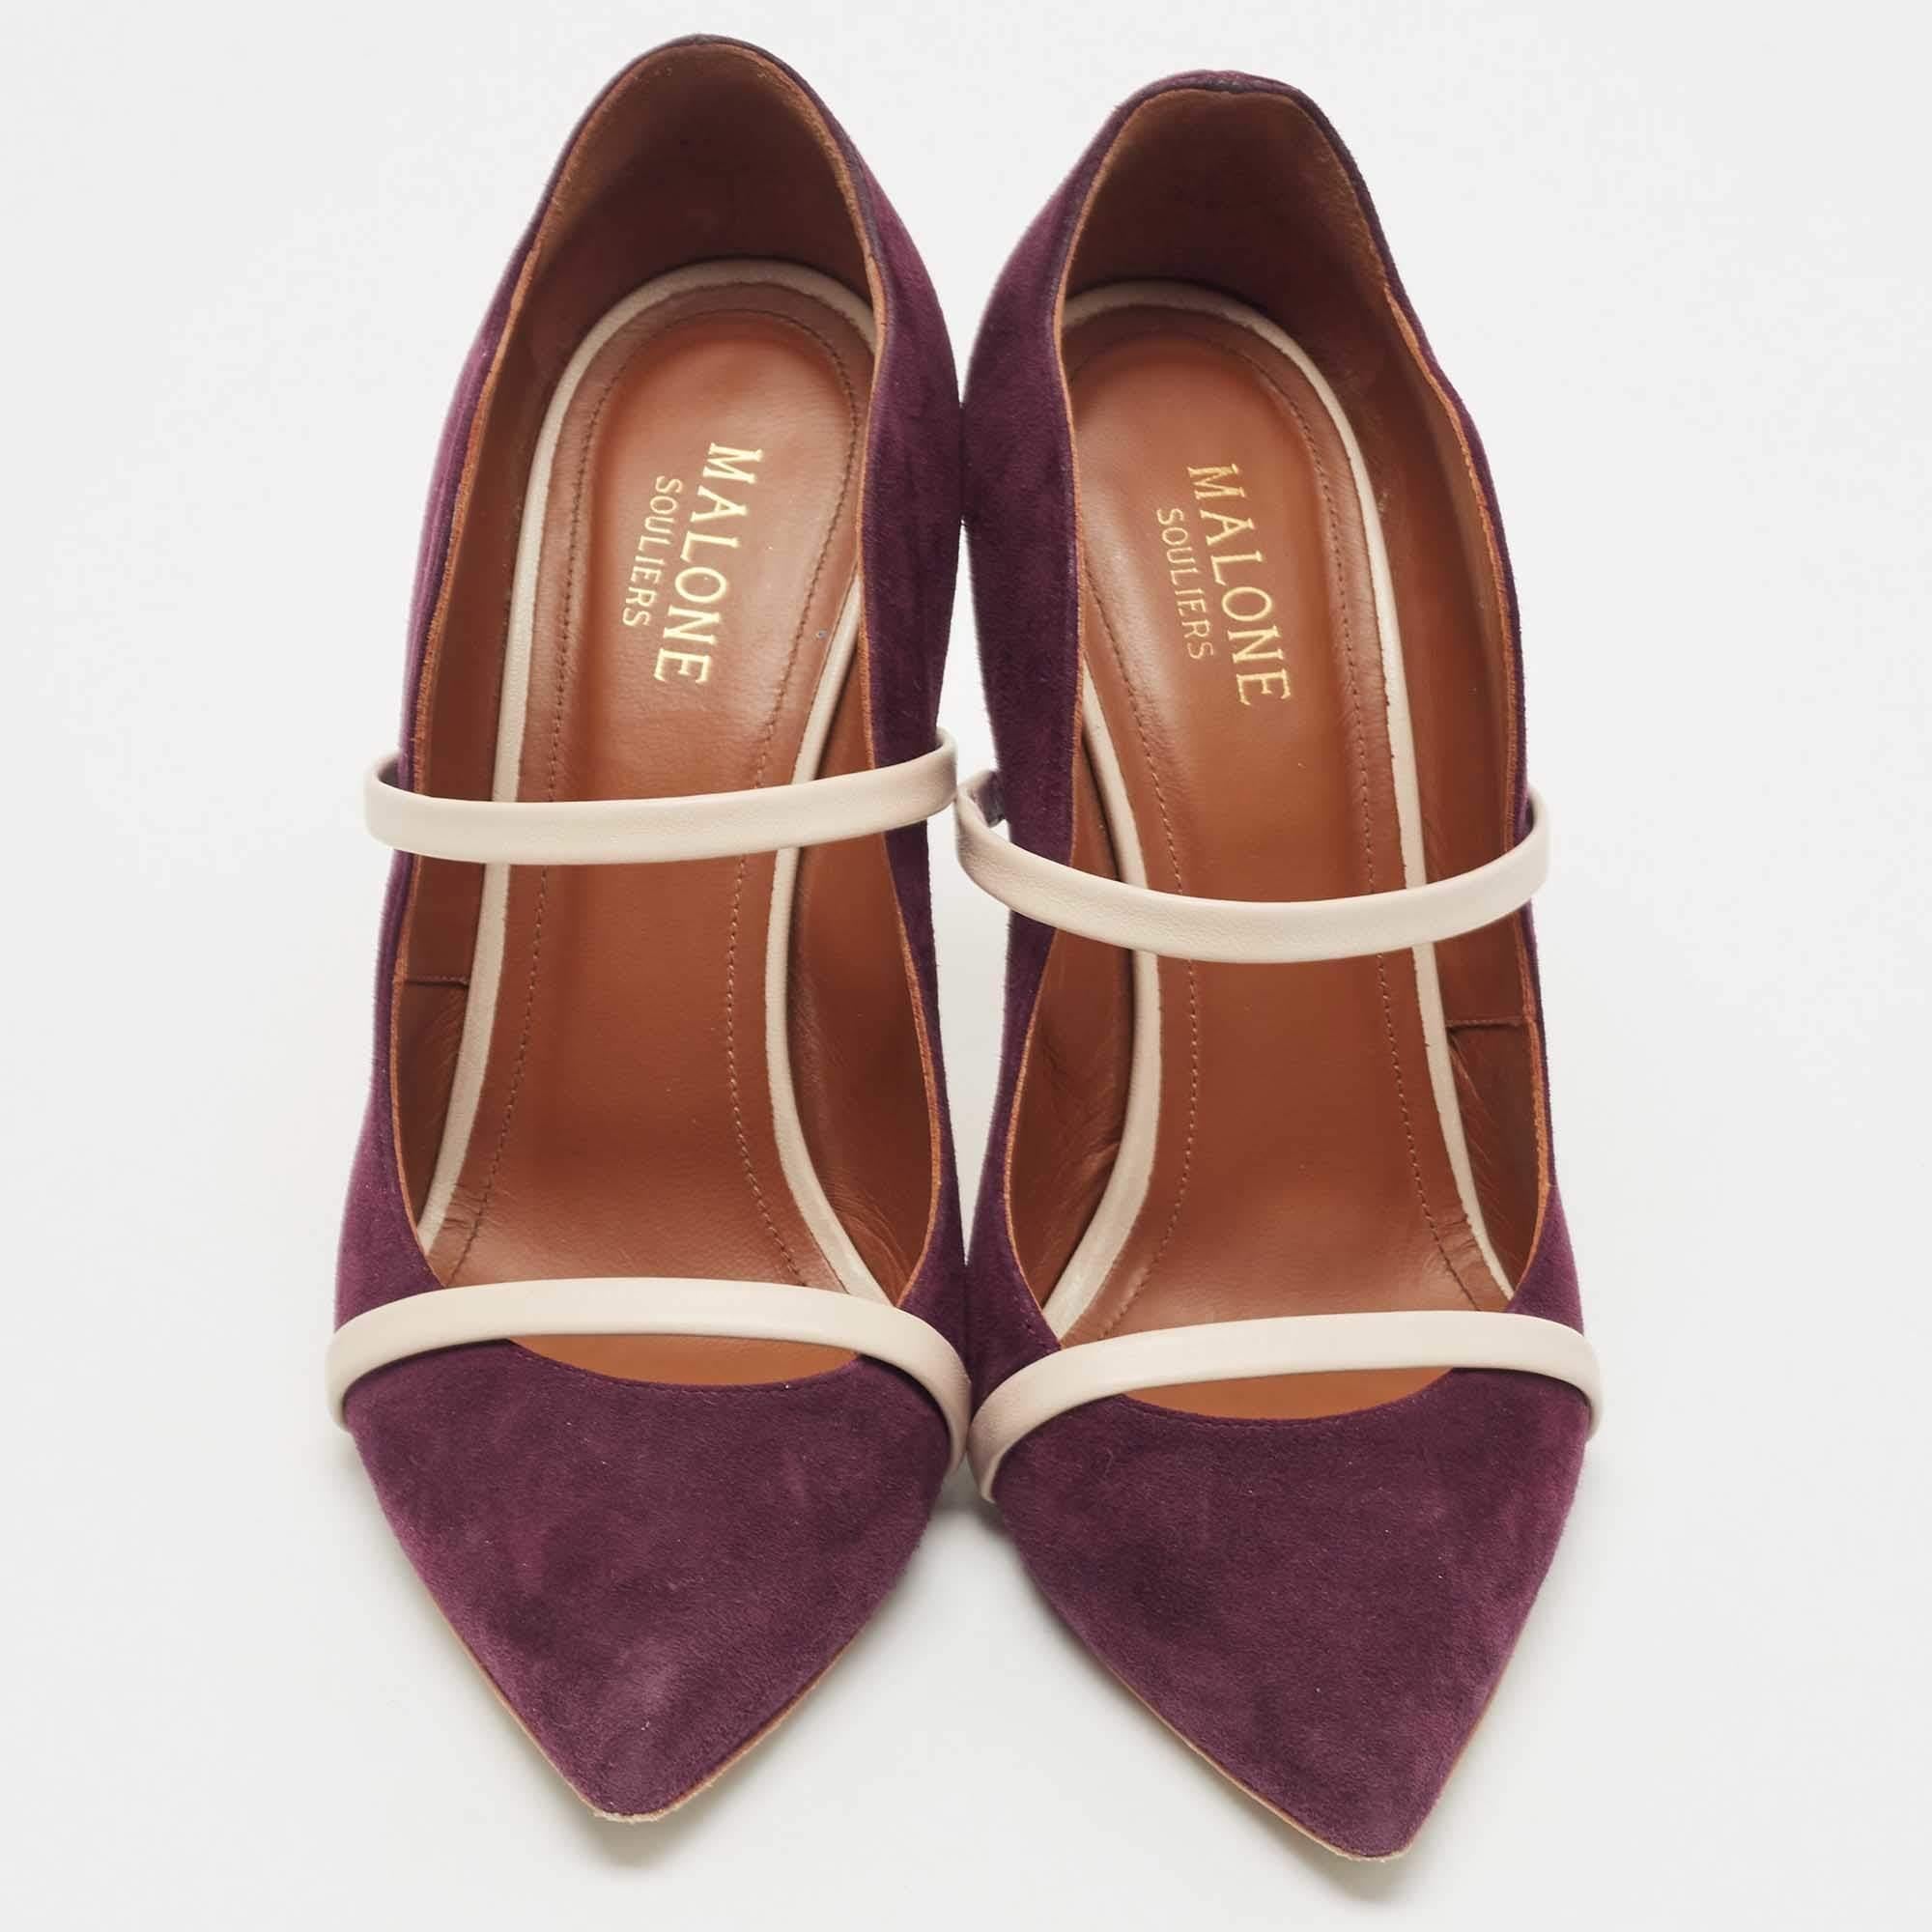 Admired for its waved silhouette, these Malone Souliers flats will make sure the spotlight follows you everywhere. The brown strap detailing across the burgundy upper enhances its contemporary shape. Created from leather and suede, they are complete